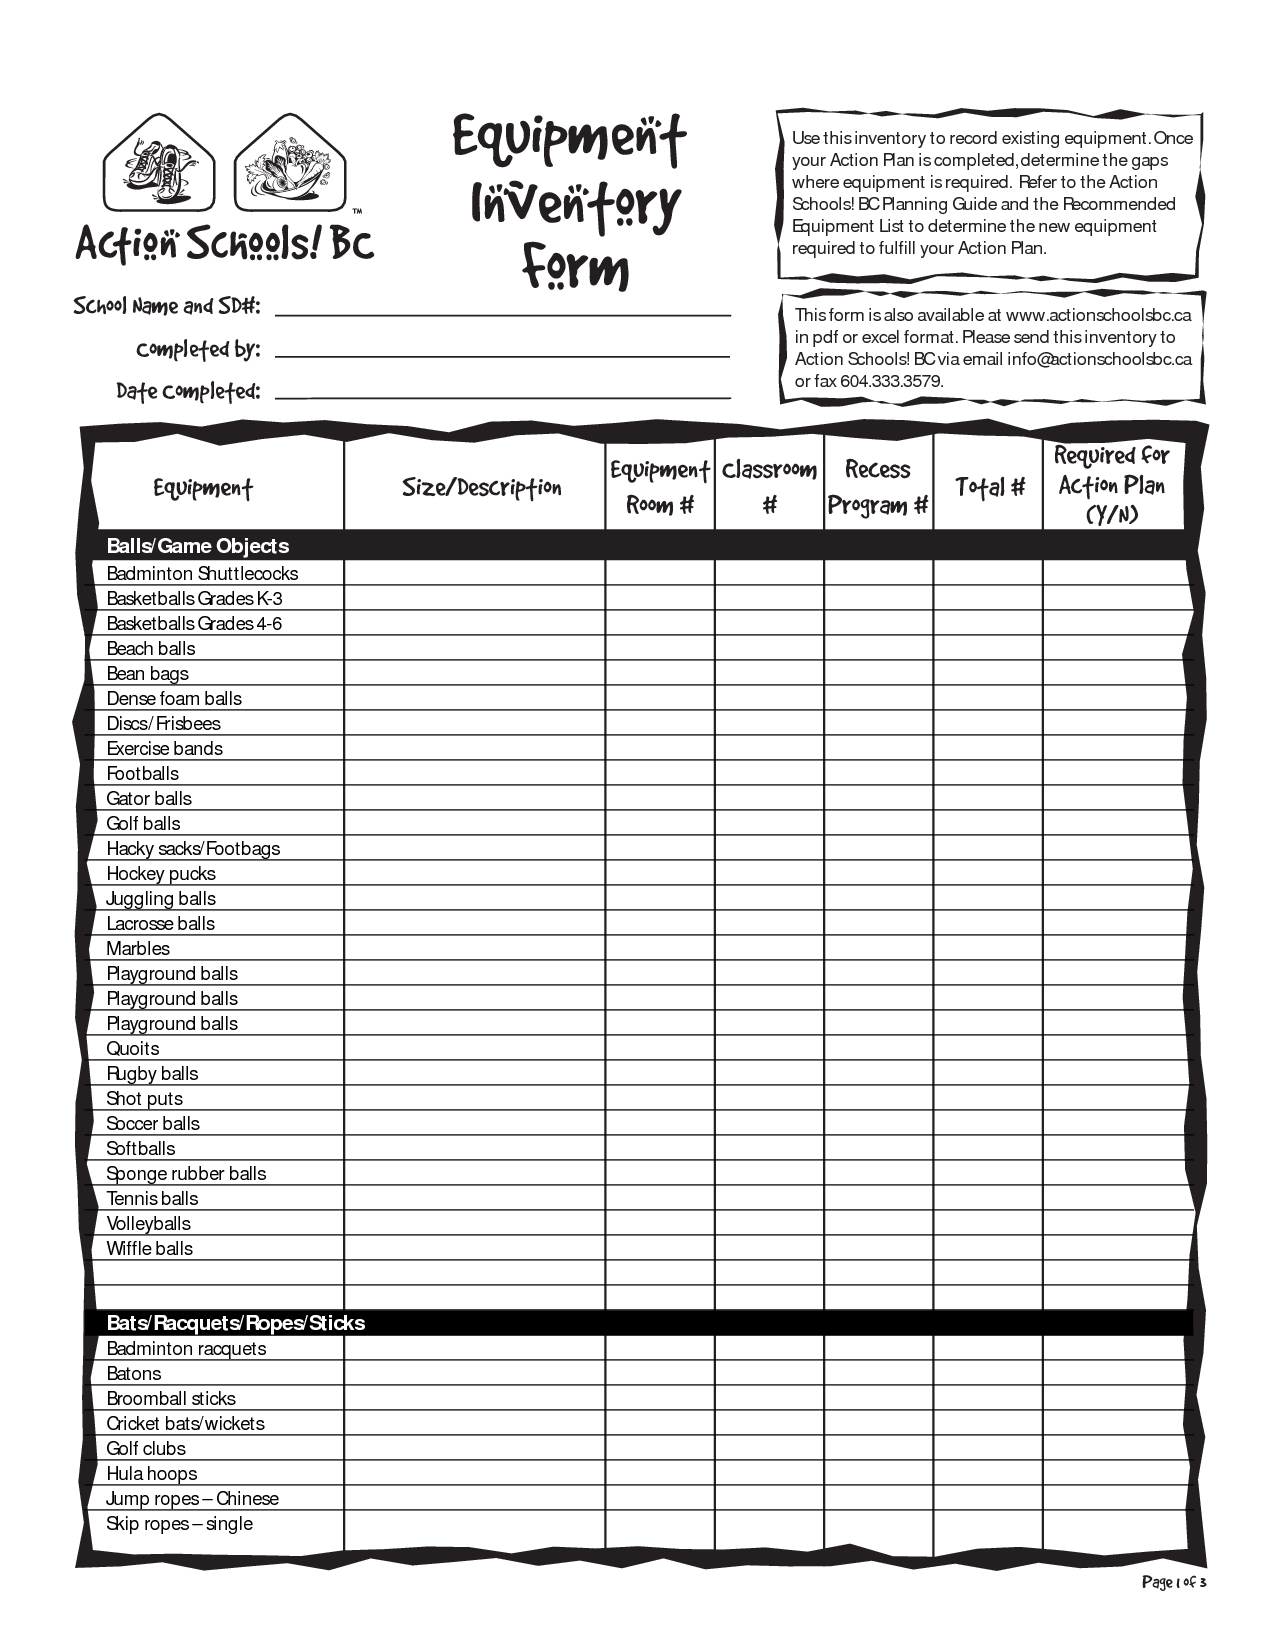 Football Equipment Inventory Spreadsheet Throughout Tool Inventory List Template Equipment 303755 Example Of  Pianotreasure